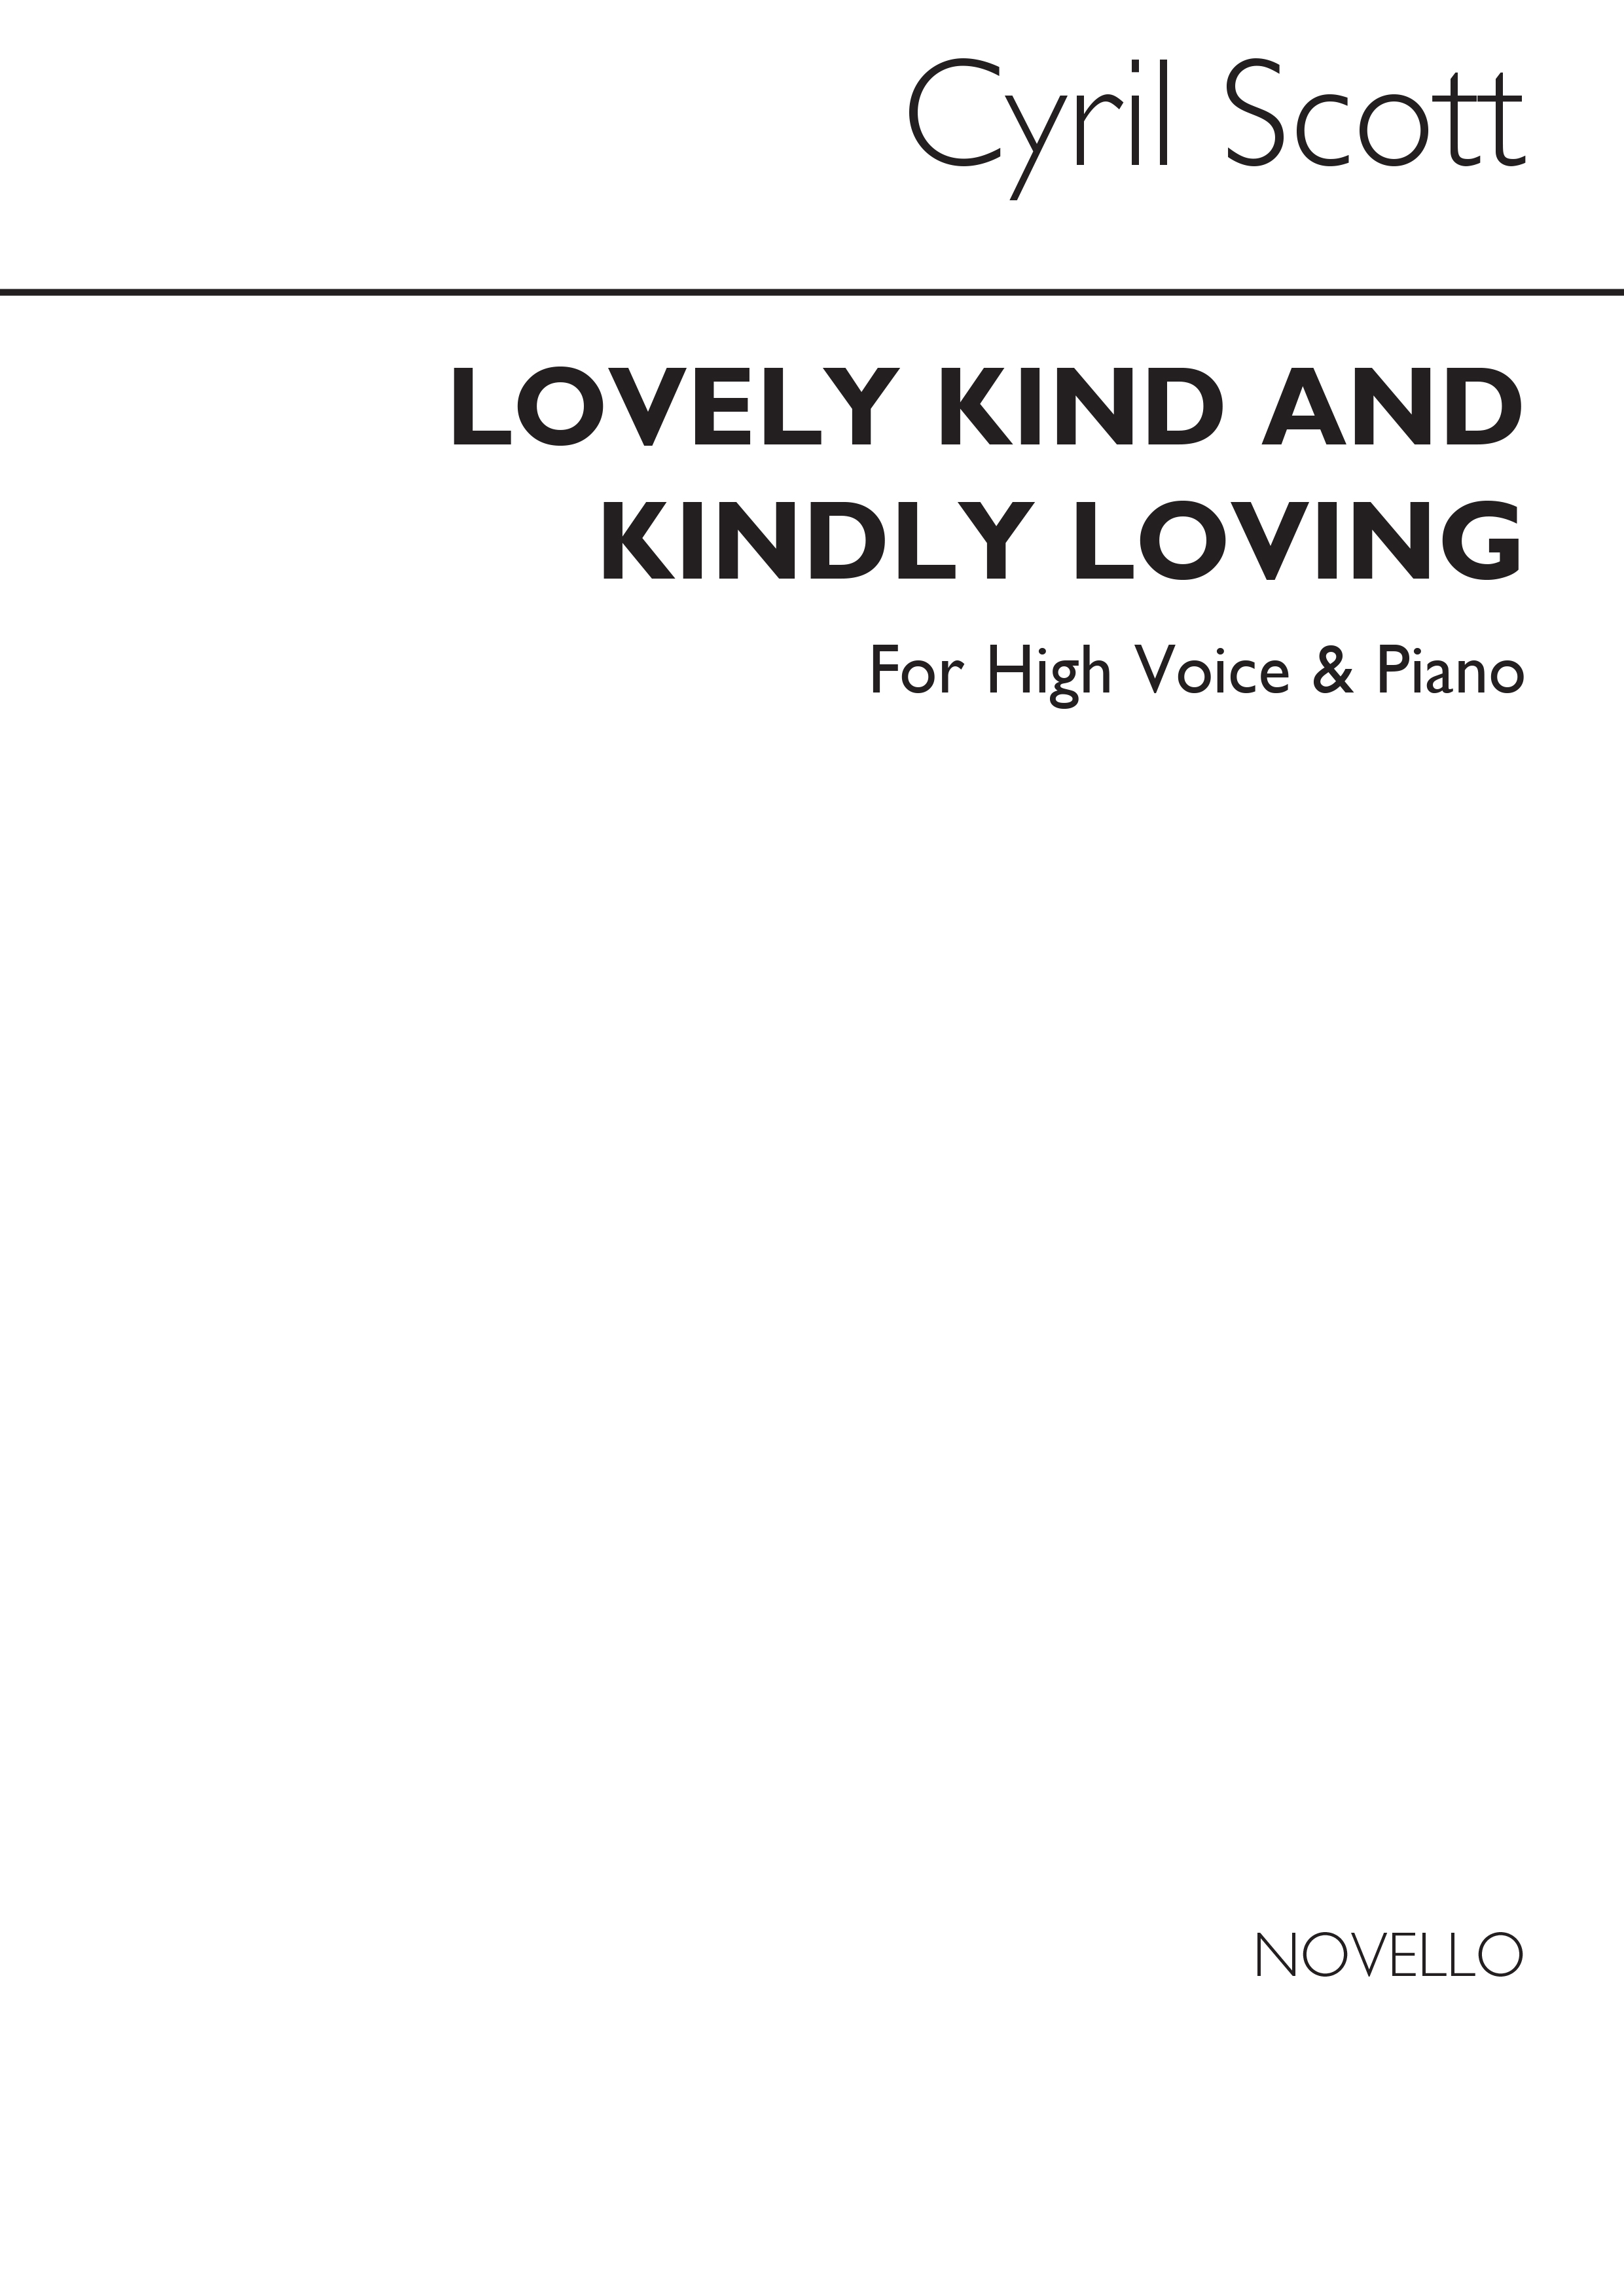 Cyril Scott: Lovely Kind And Kindly Love Op55 No.1: High Voice: Vocal Work